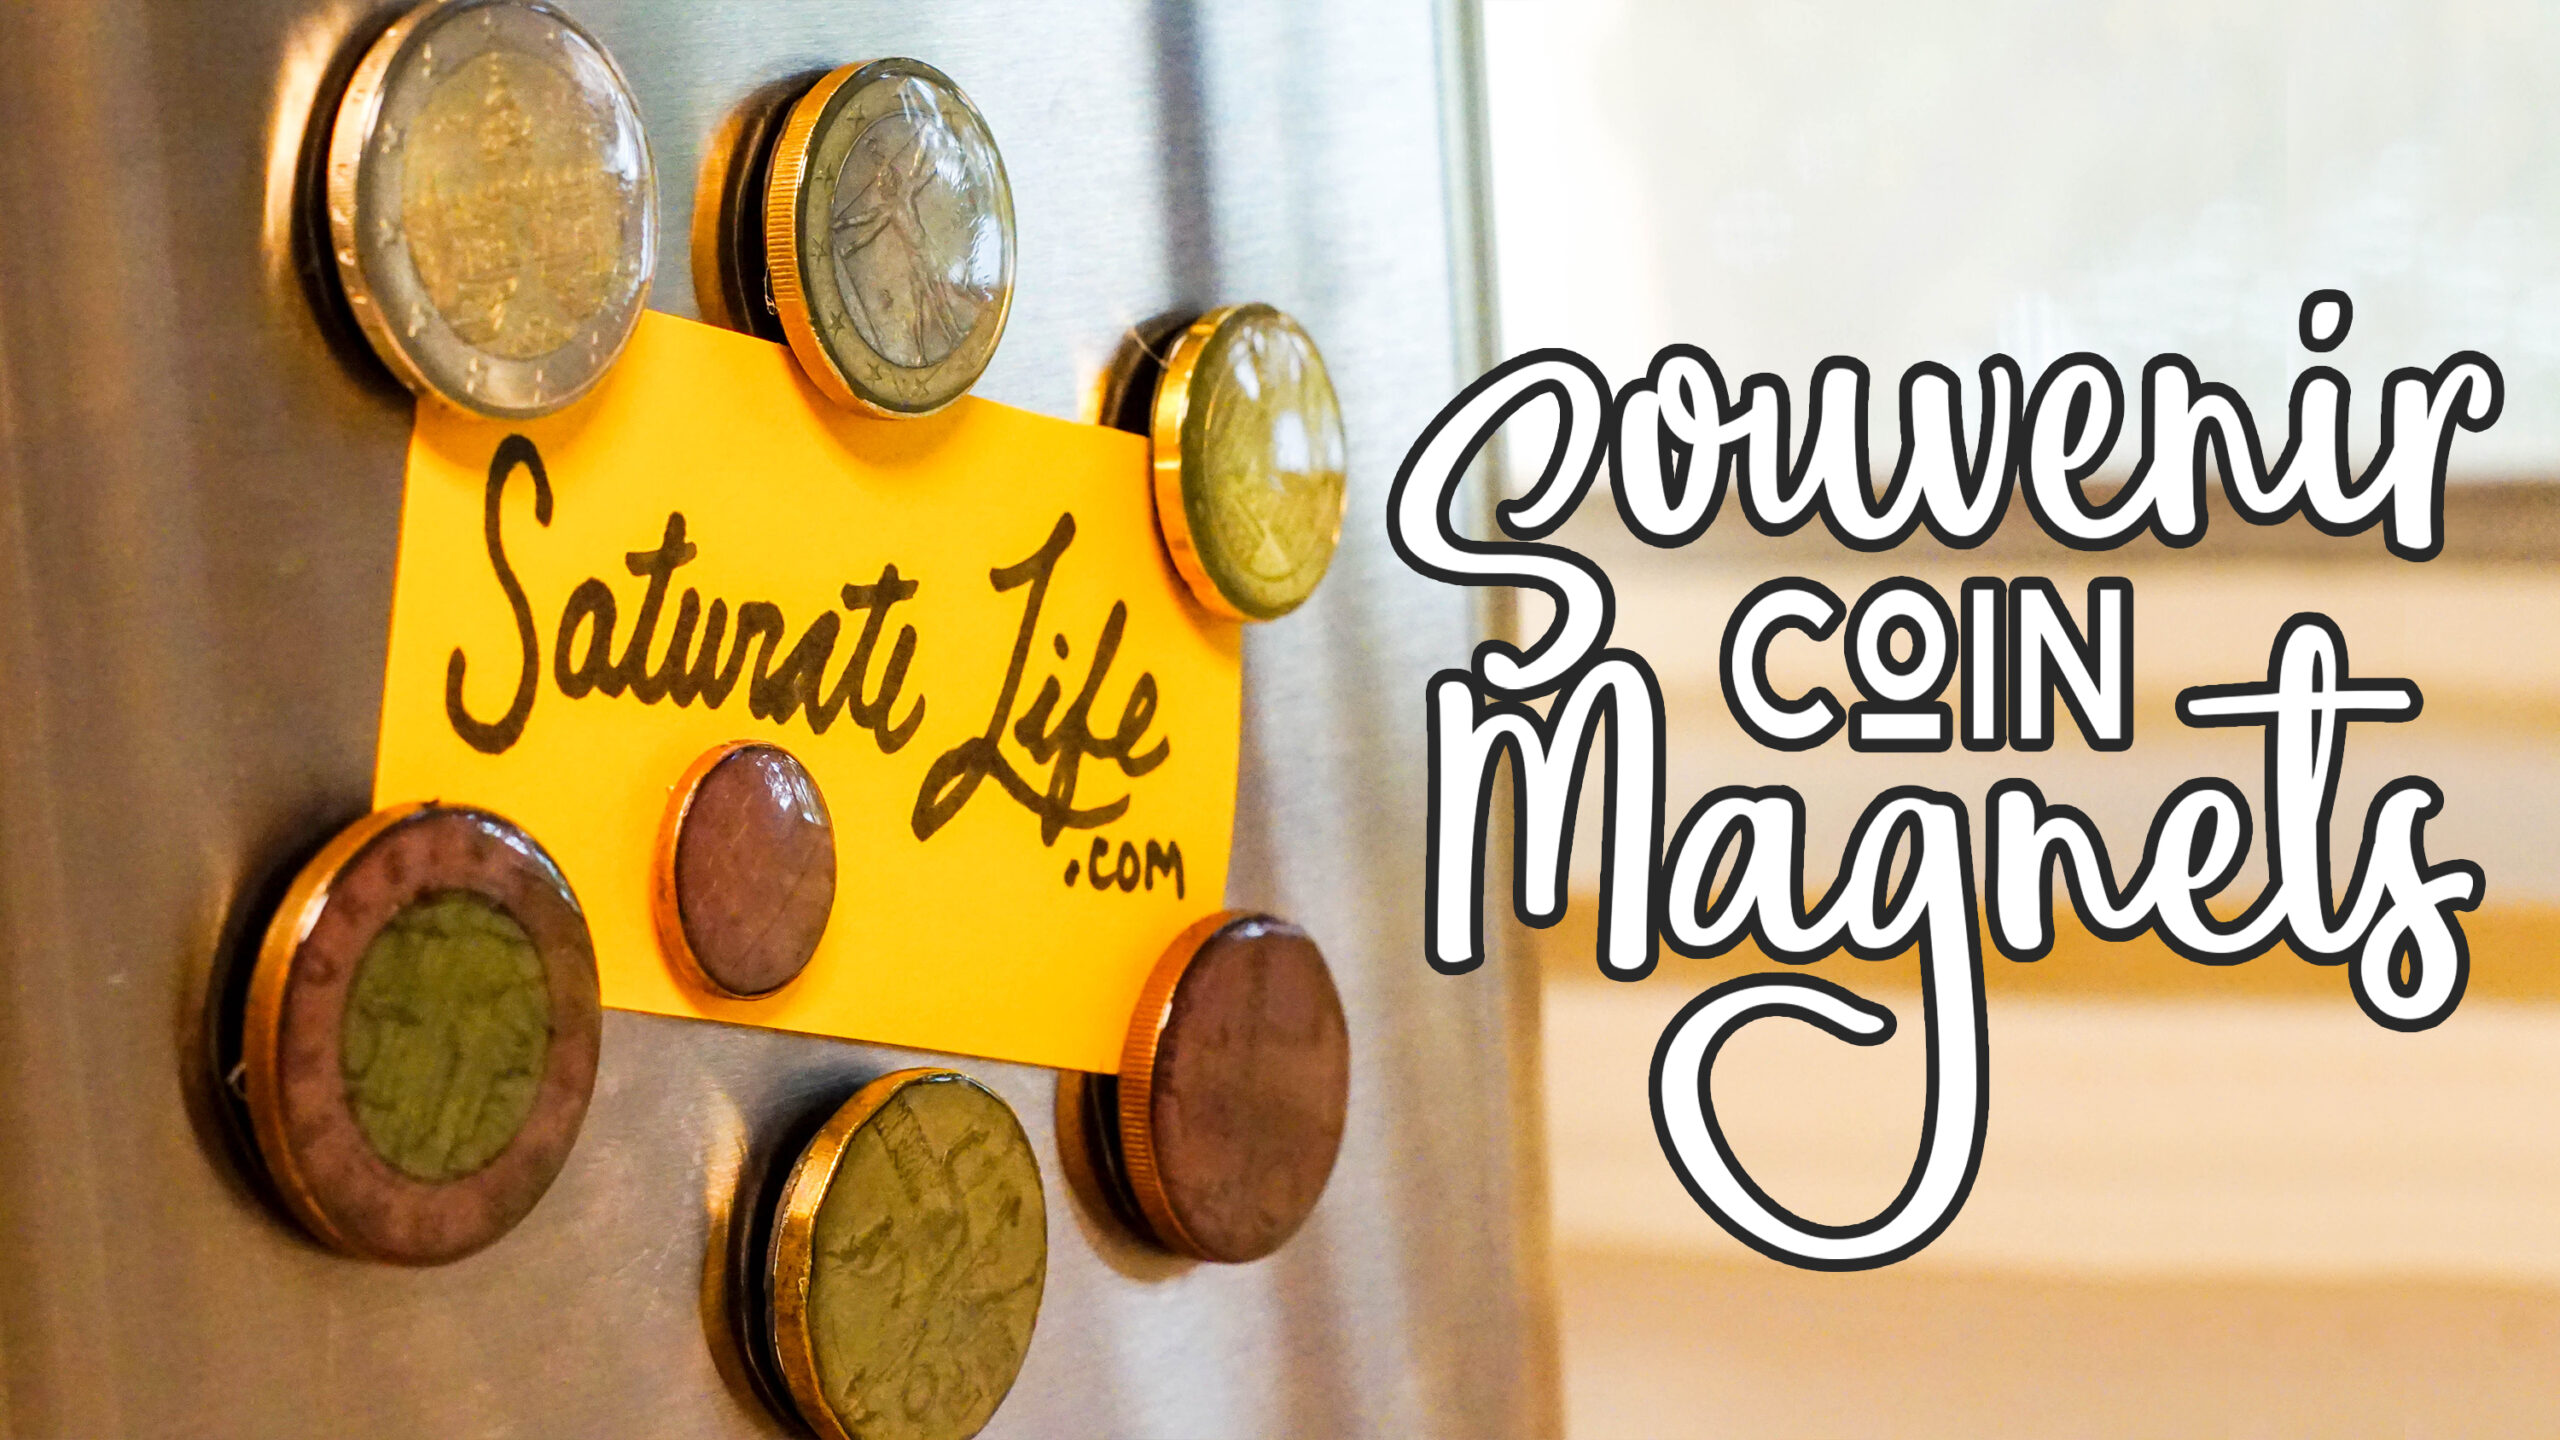 Souvenir Magnets from Coins - Saturate Life